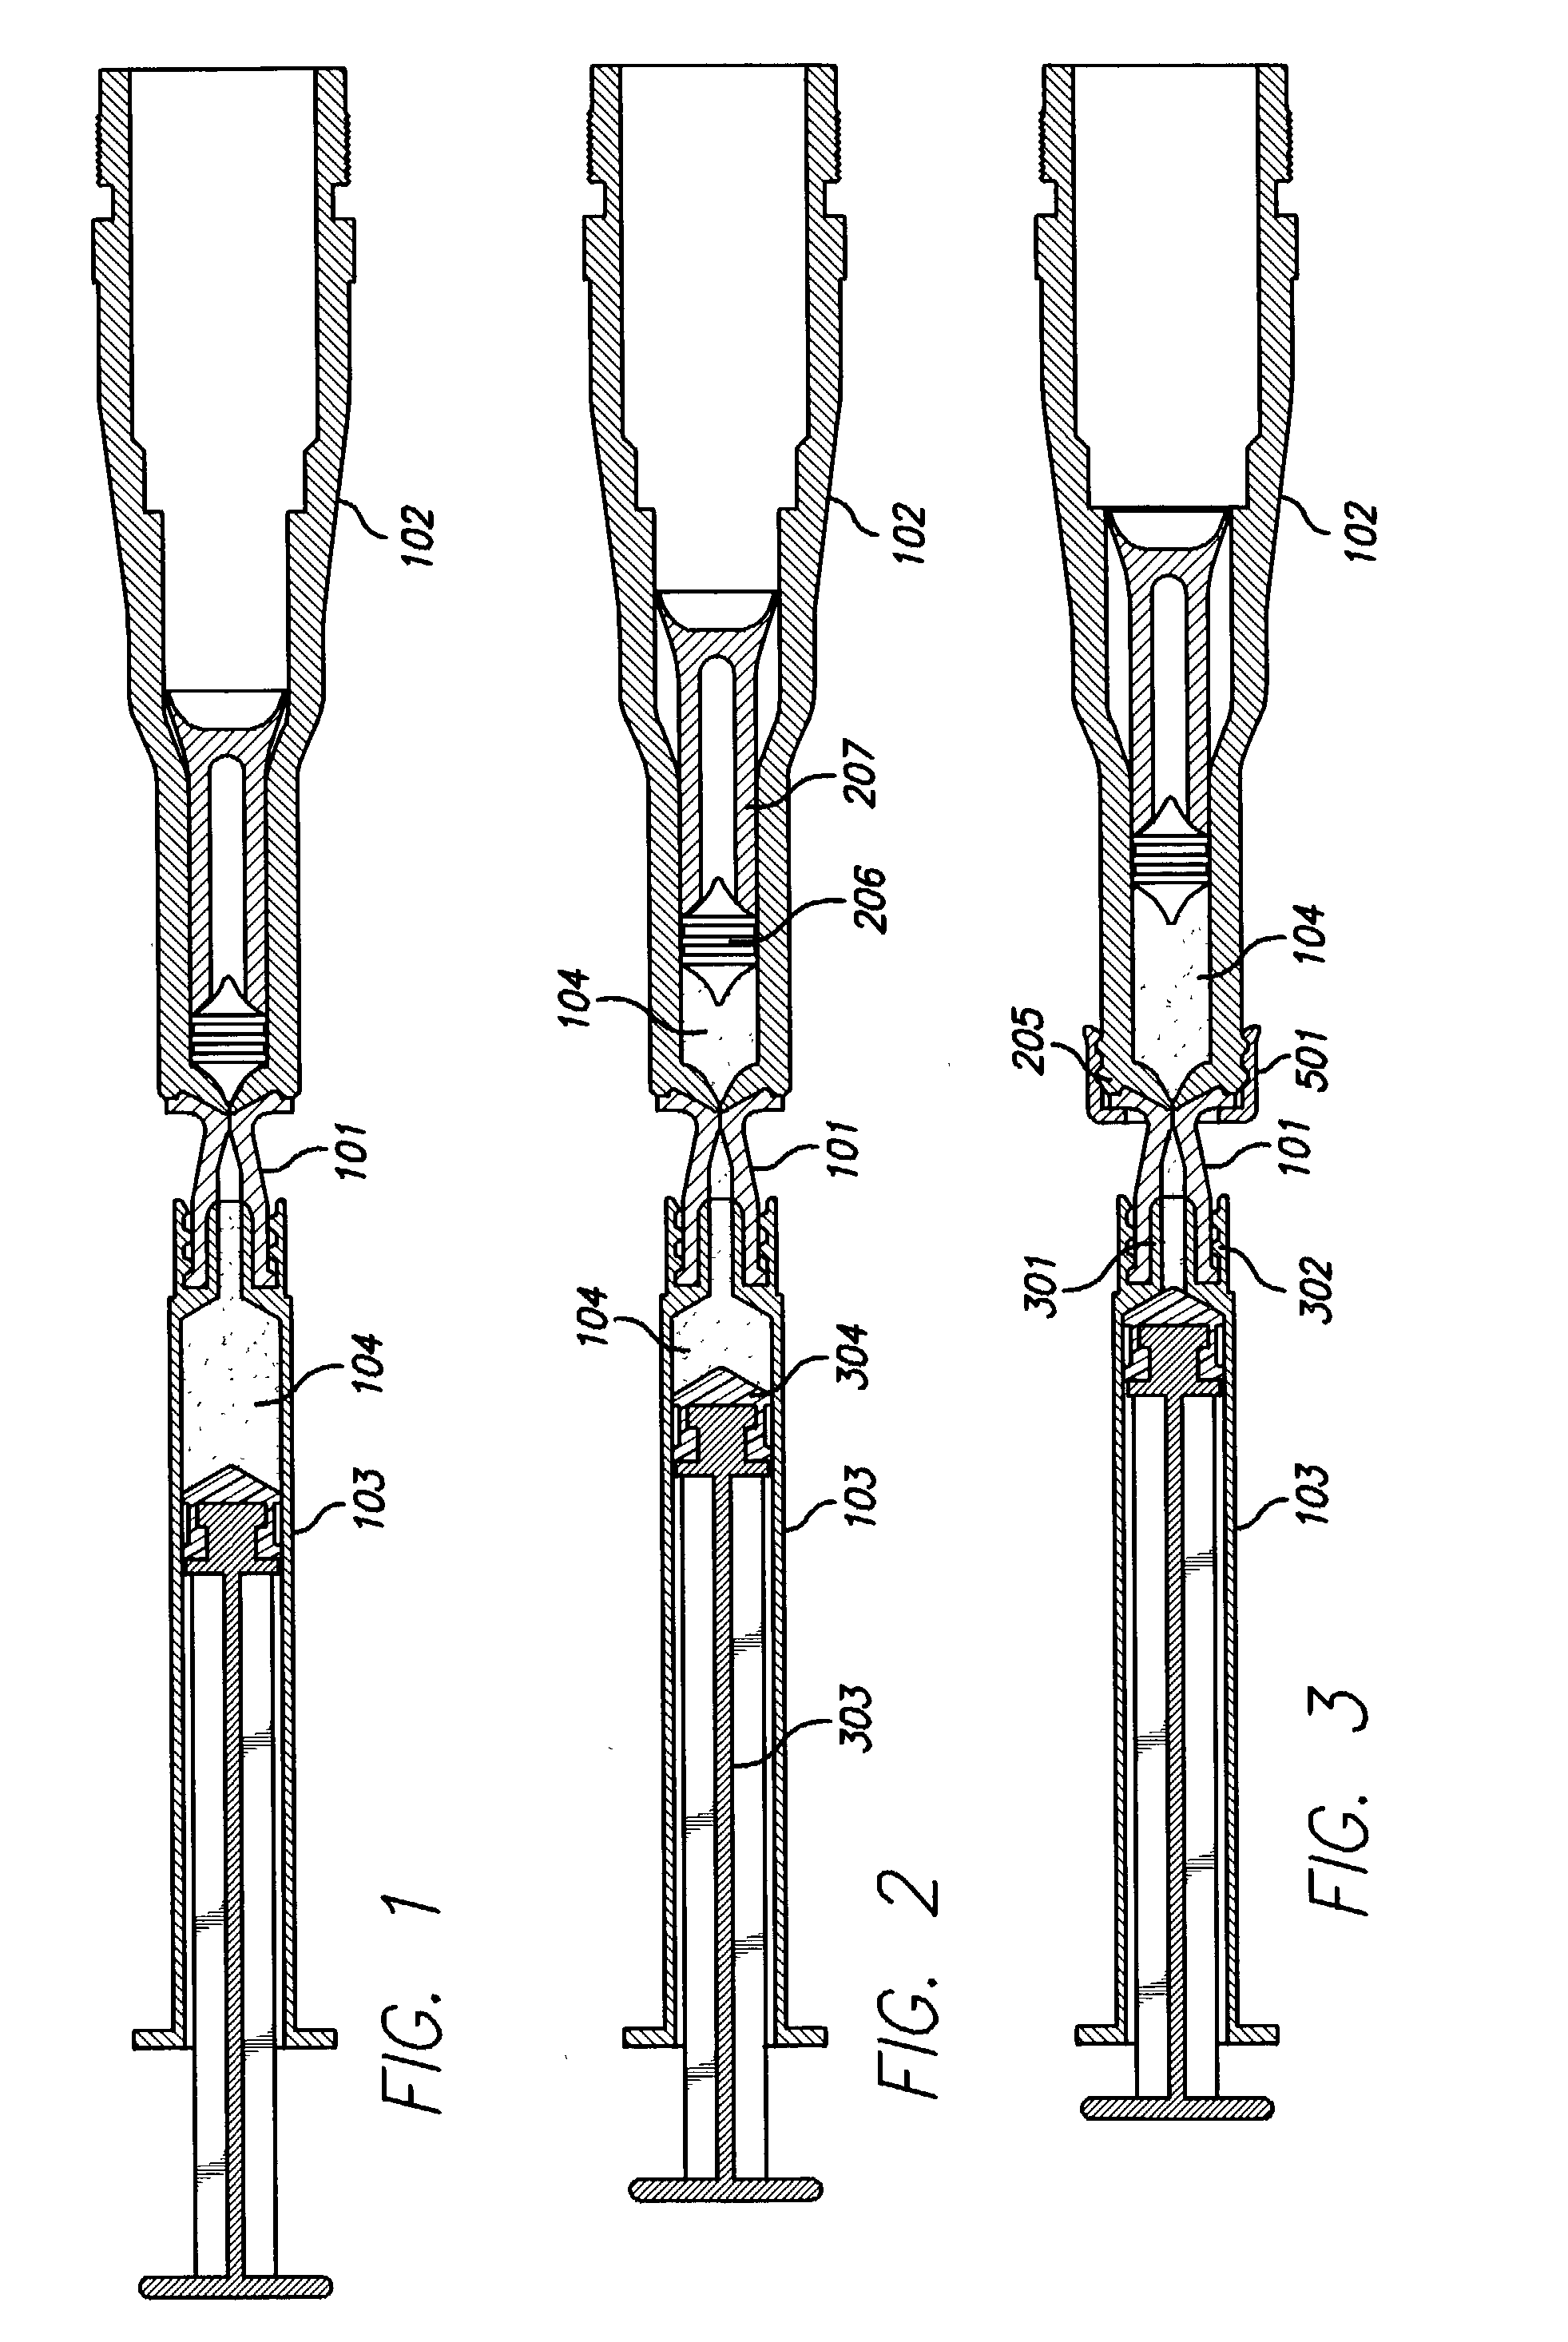 Method and apparatus for filling or refilling a needle-less injector